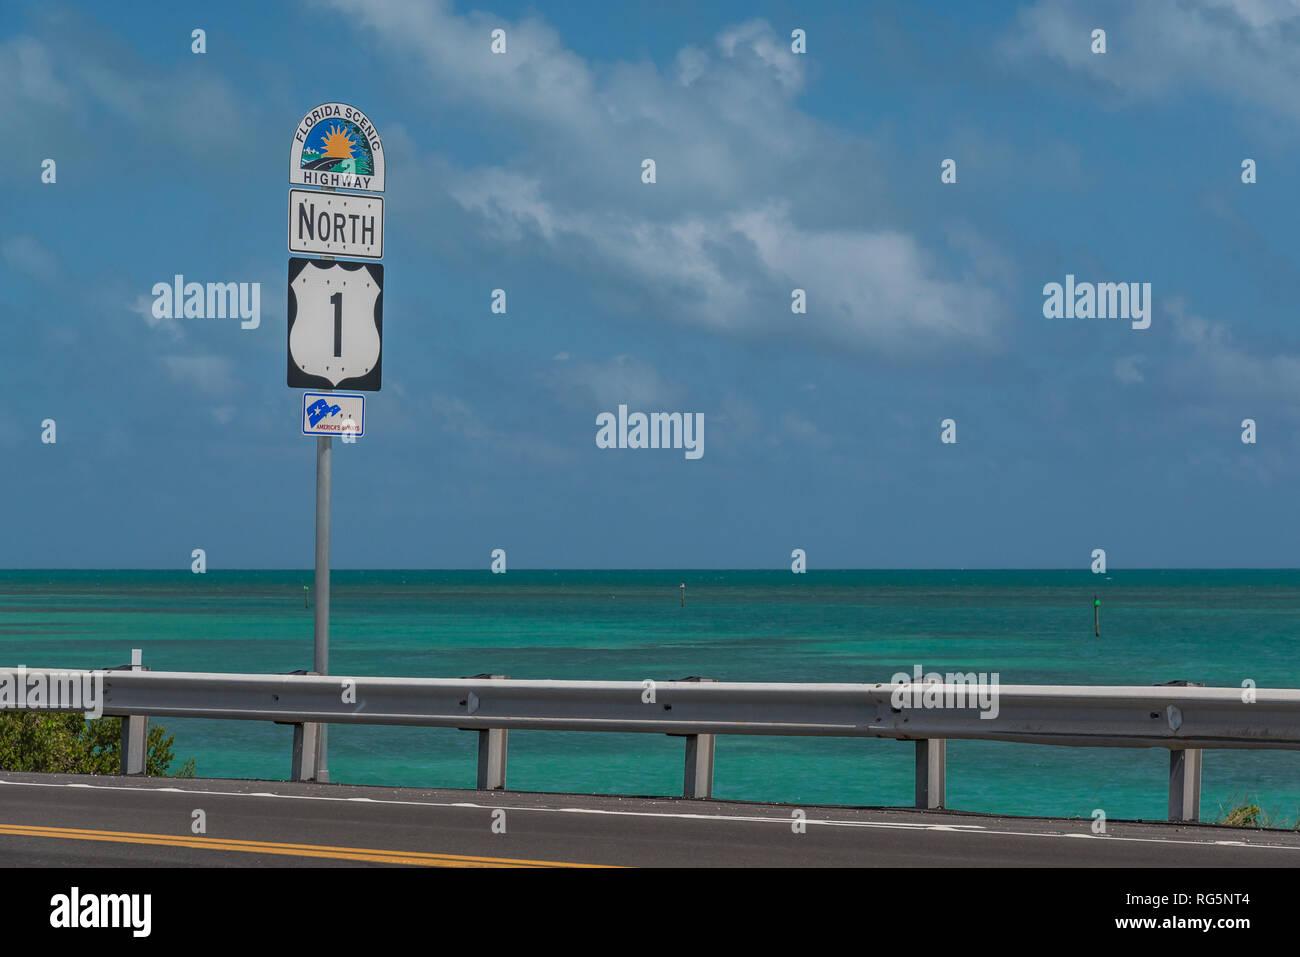 Highway road sign for Florida Scenic Highway North 1, the Overseas Highway to the Florida Keys, with sea and sky in the background. Stock Photo